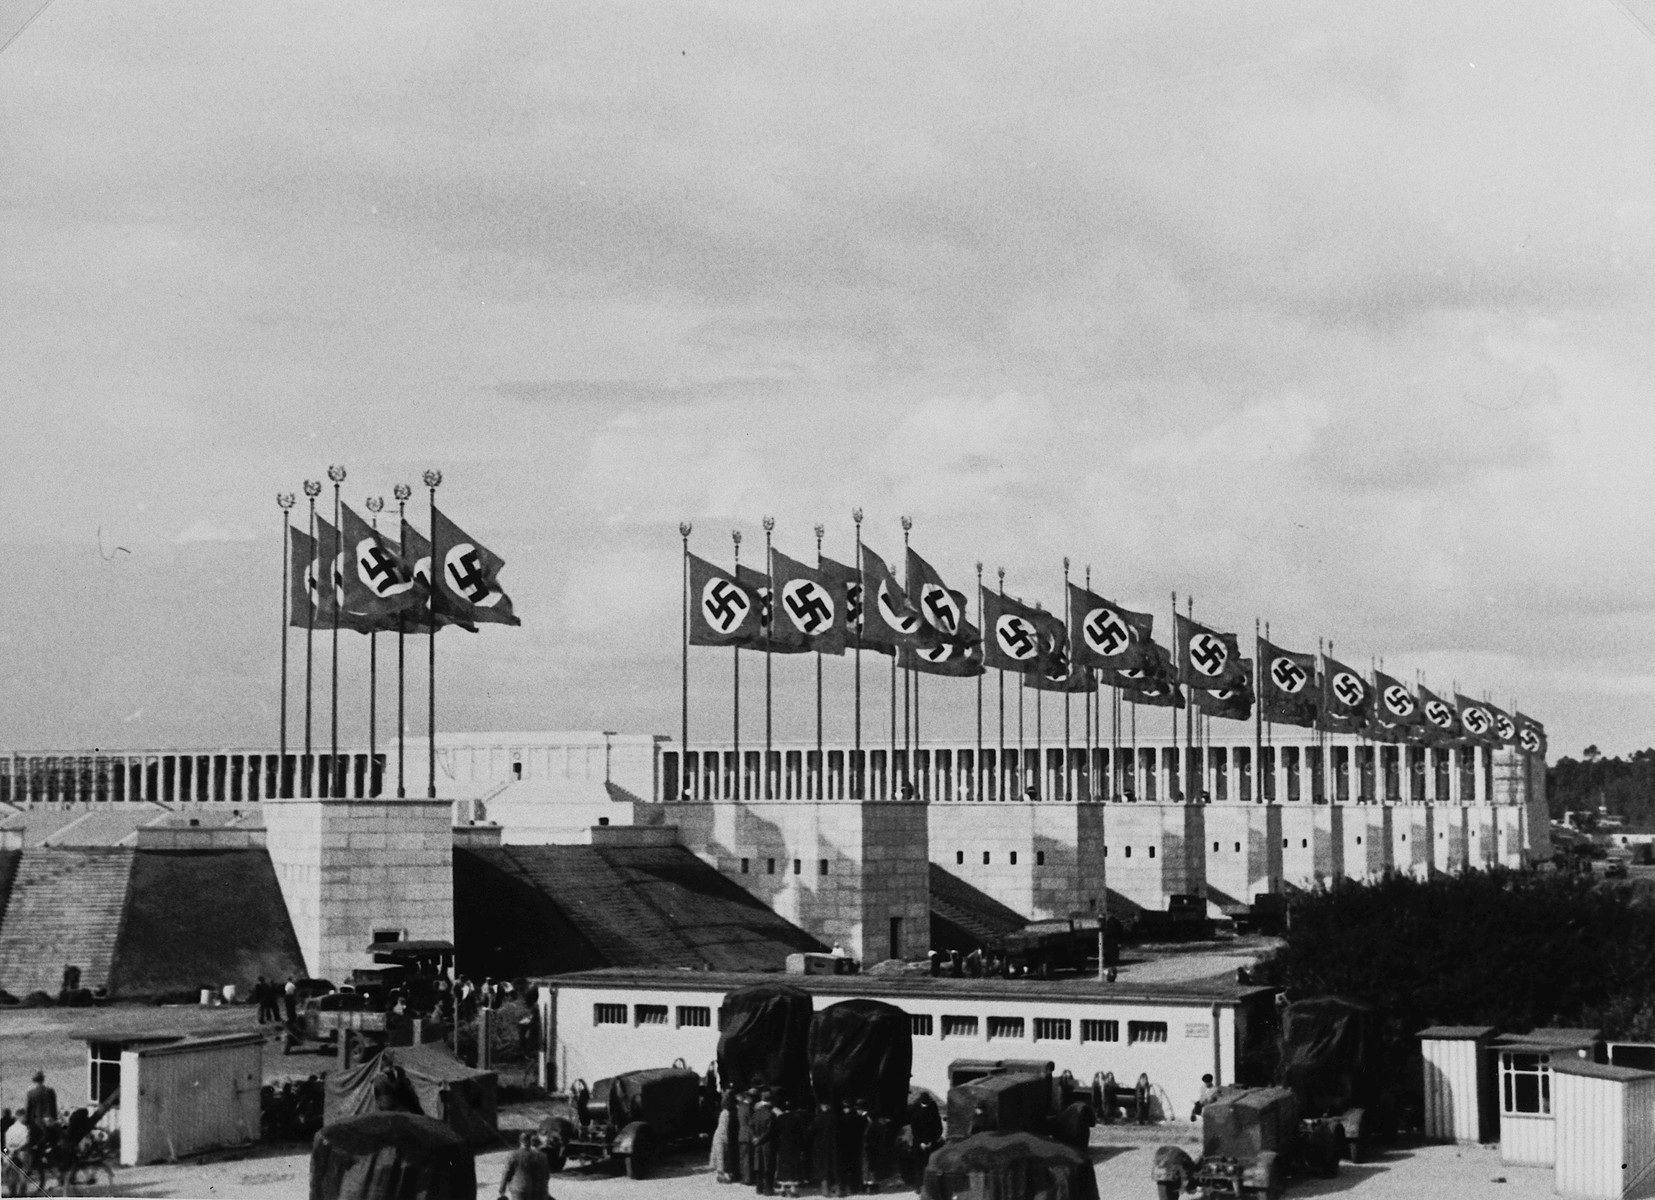 Nazi flags wave above the stadium for the Nuremberg rally.

This photograph was taken by a German Jewish woman, Lilli Rahn, who later emigrated.